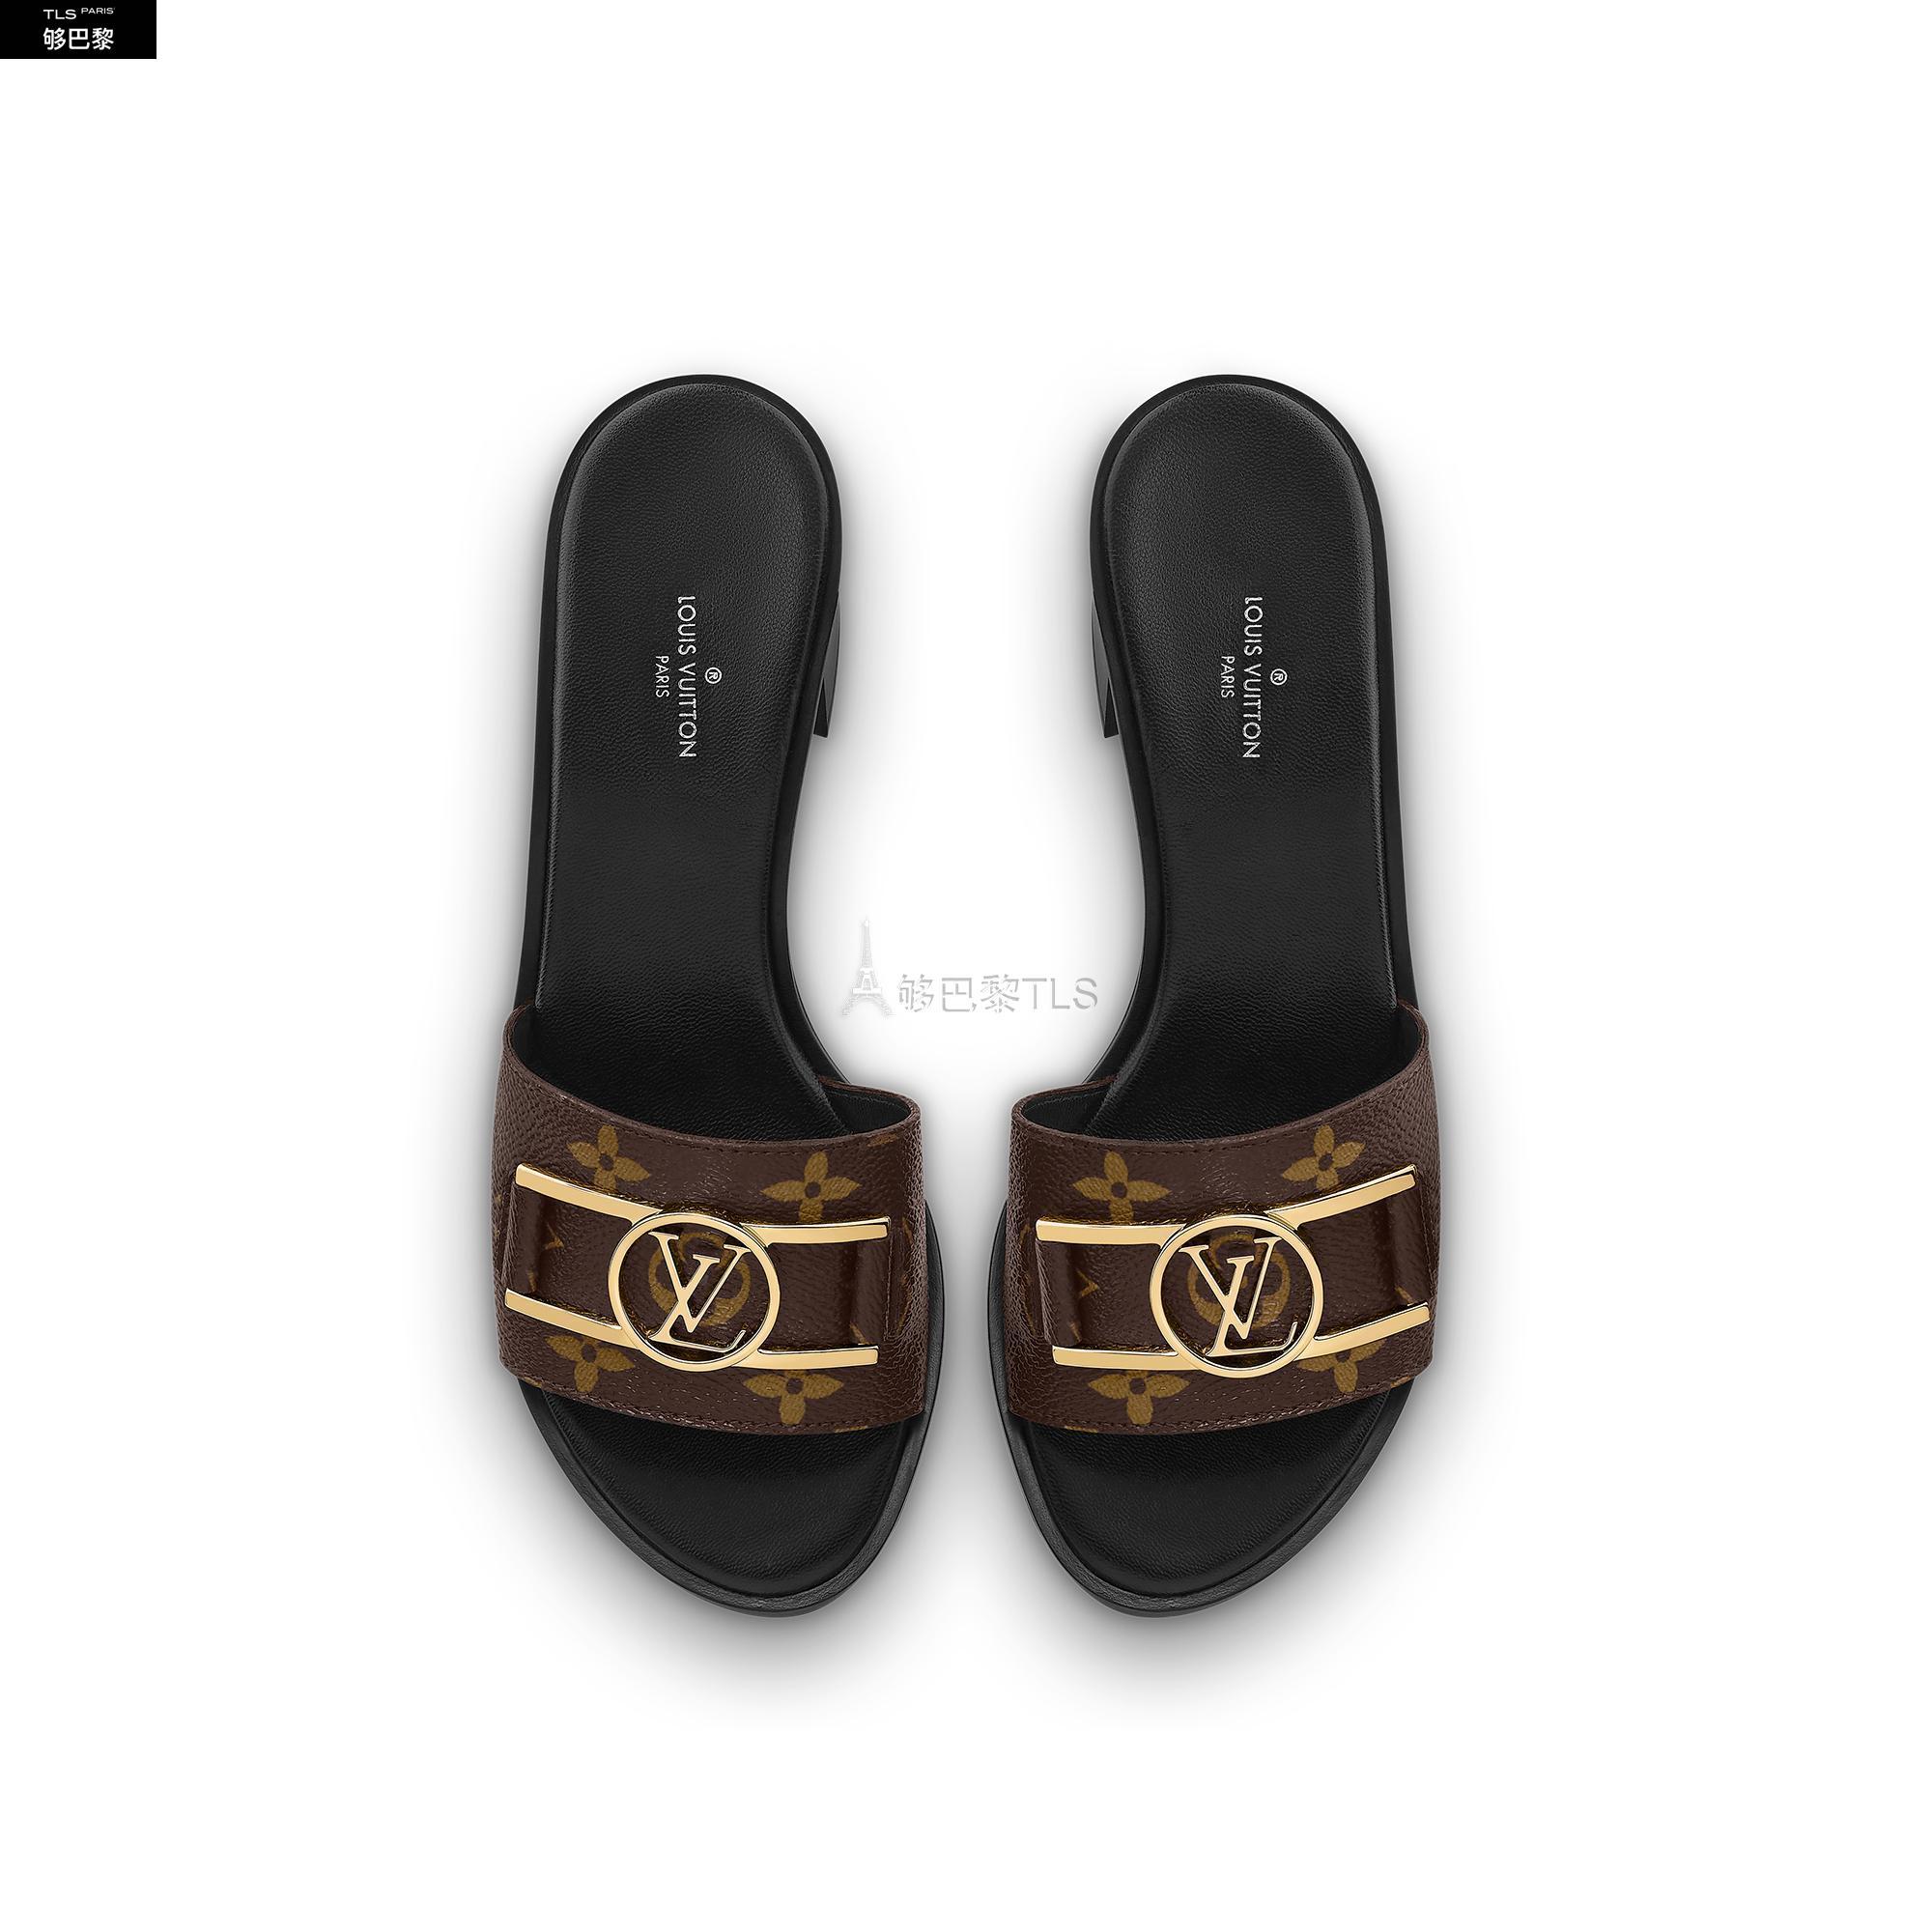 China Wholesale Supplier Branded shoes lv sandals, join us on whatsapp | Yupoo